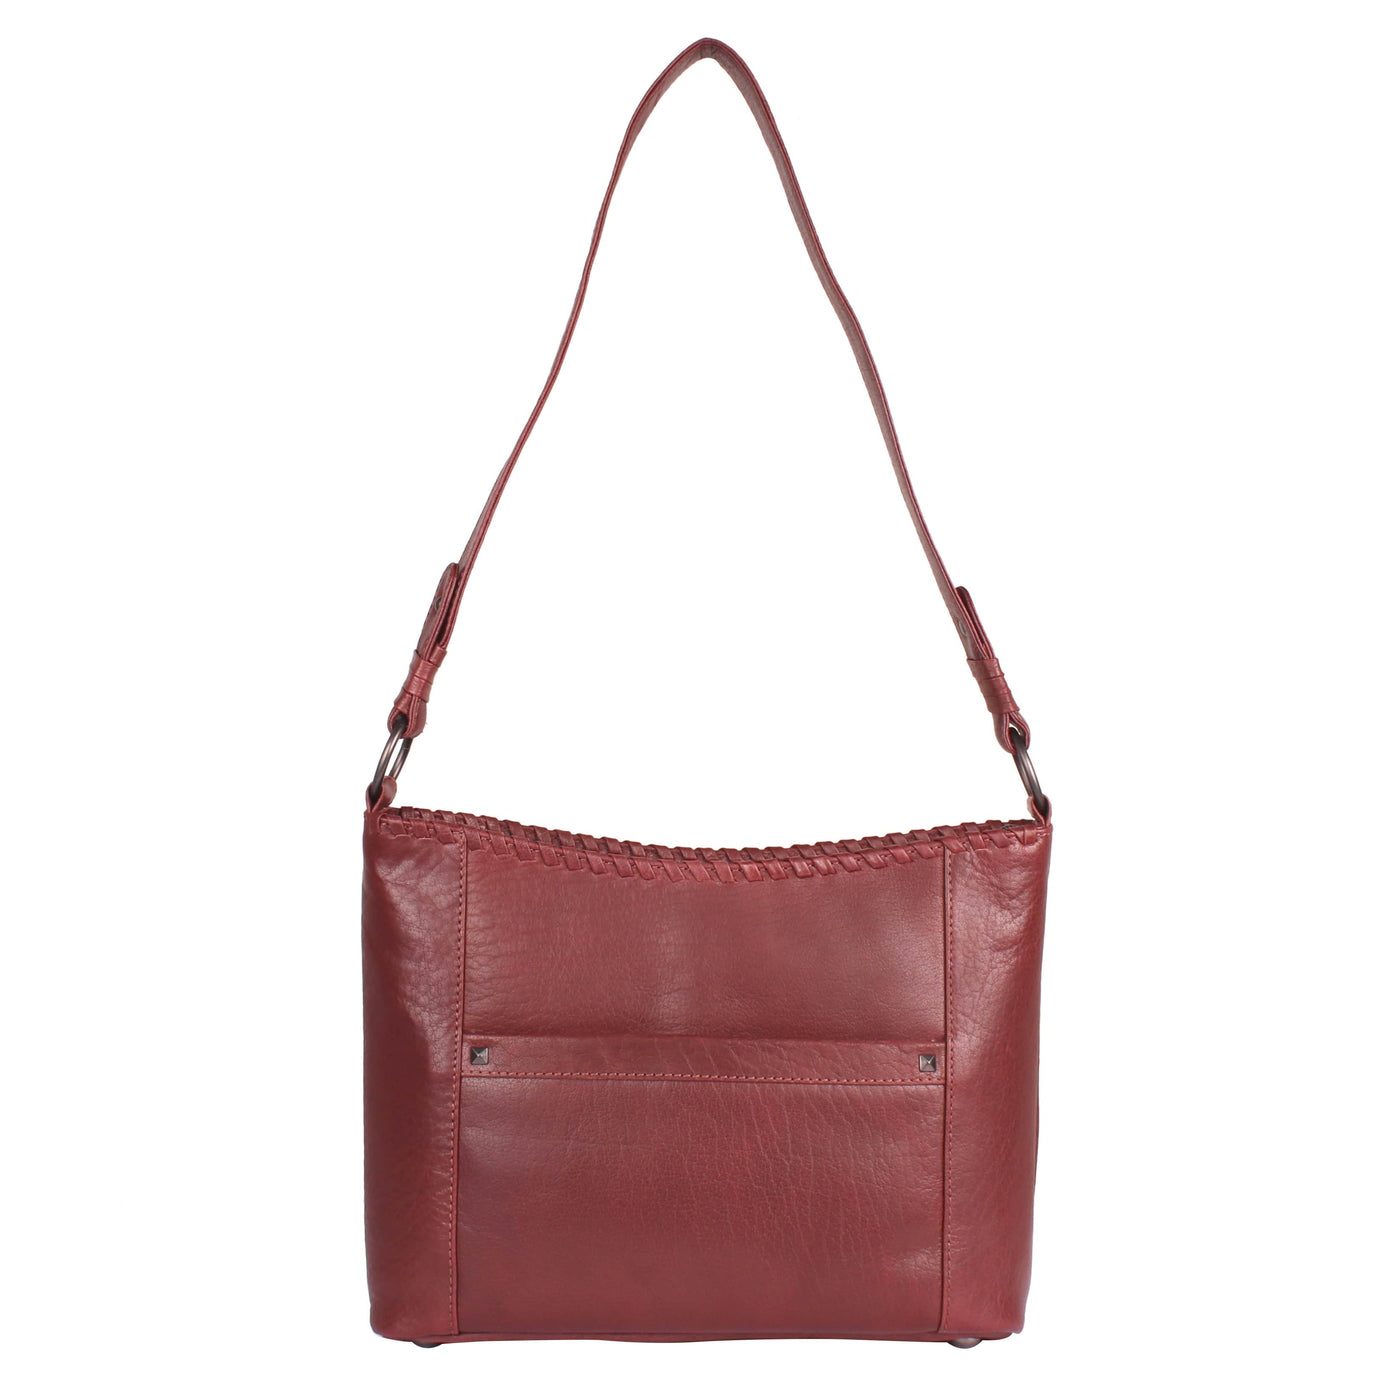 Lady Conceal Concealed Carry Purse Mahogany Concealed Carry Juliana Leather Hobo by Lady Conceal Red